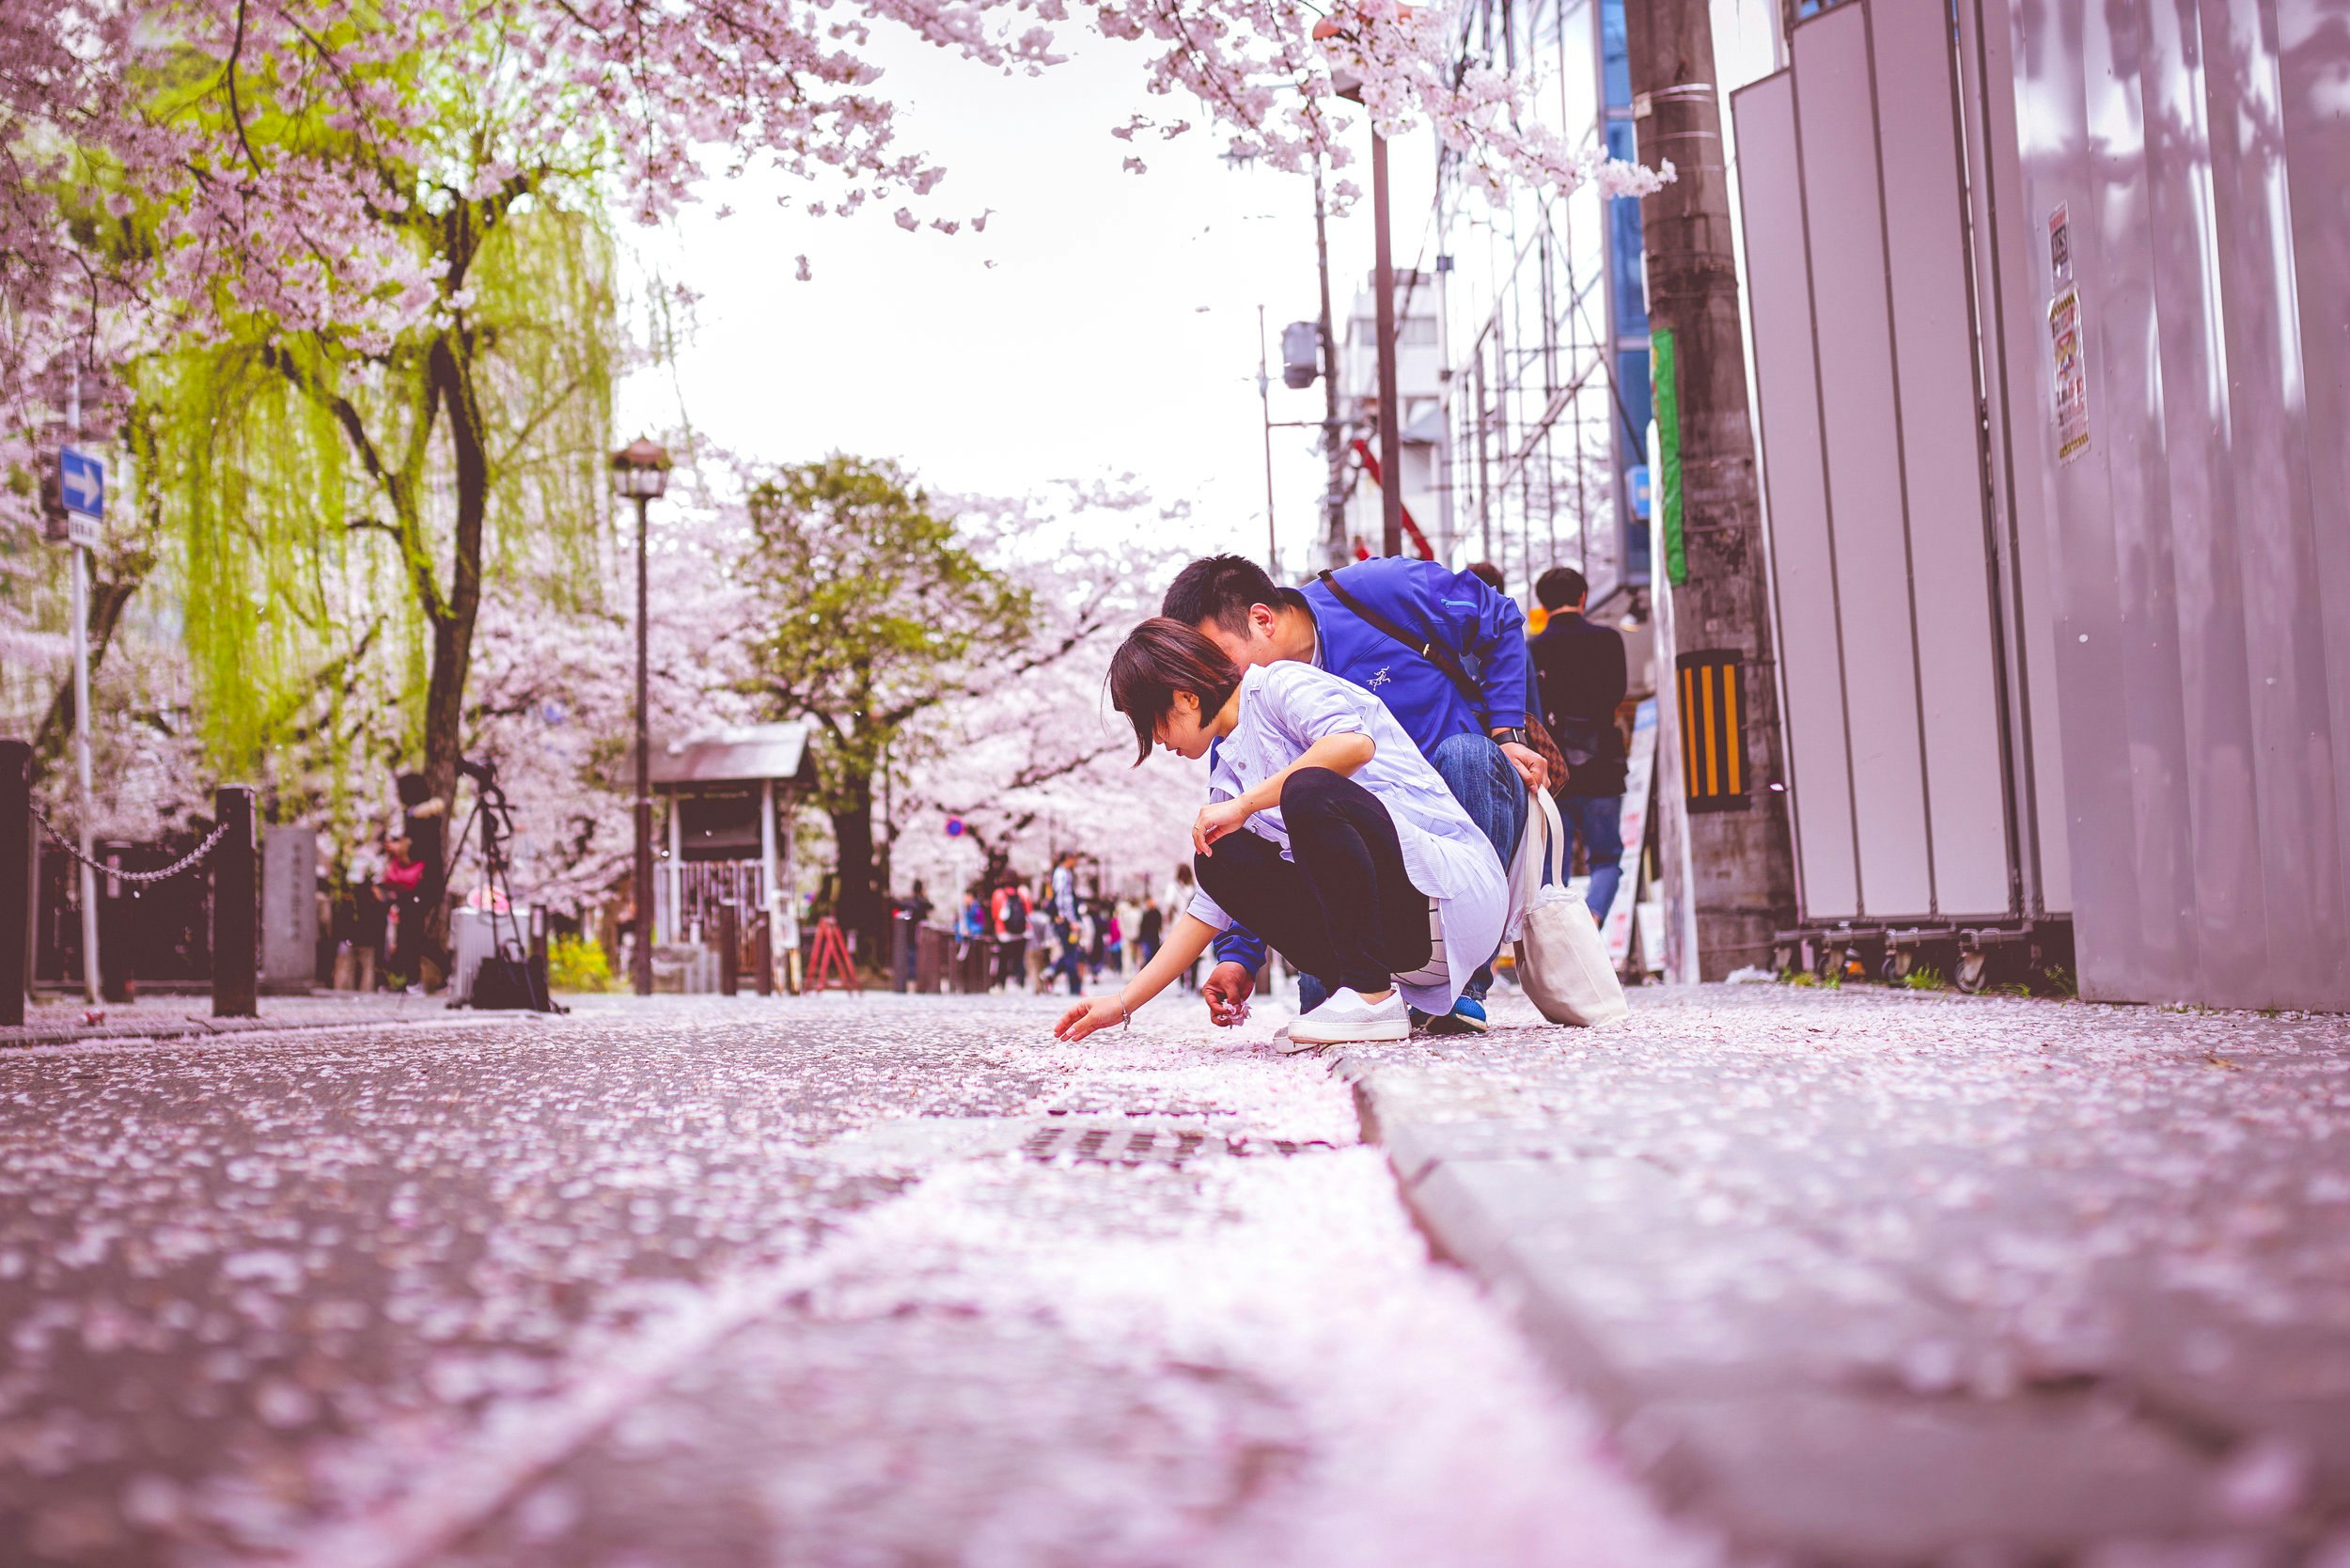 A couple crouching down in a street covered with cherry blossoms to look at the petals in Kyoto